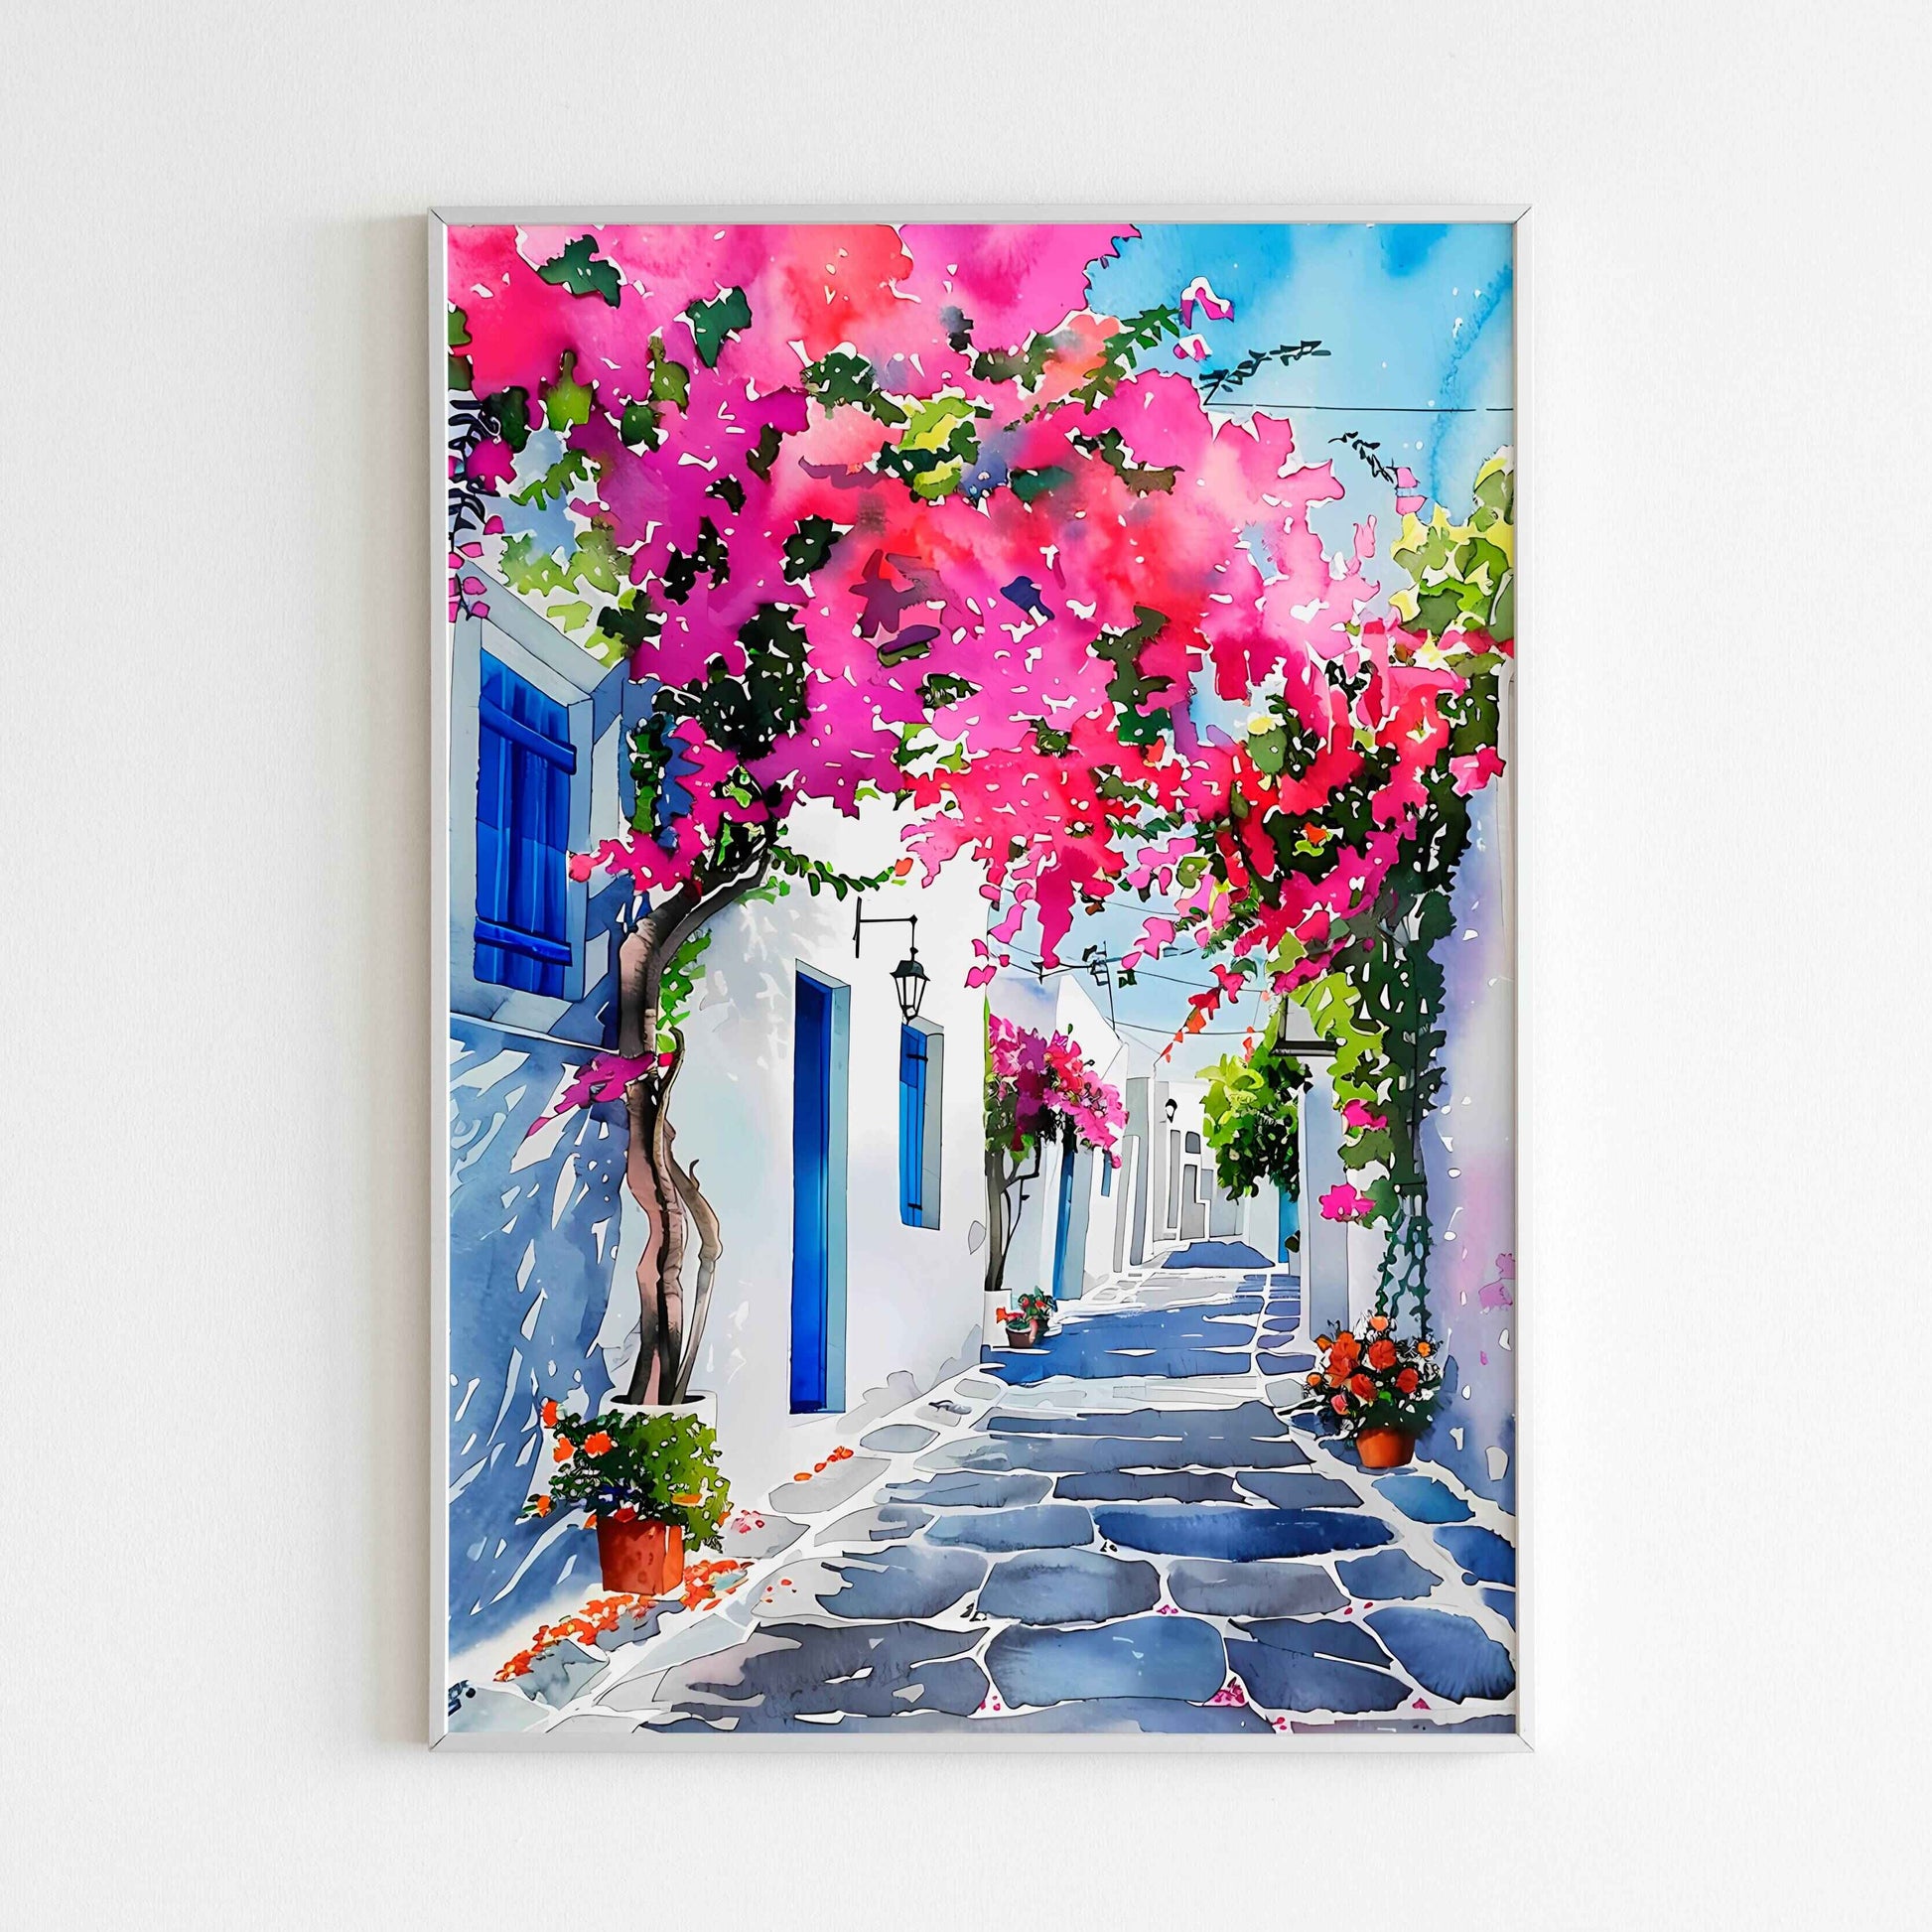 Capture the essence of a Greek street scene with this travel printable poster (physical or digital).